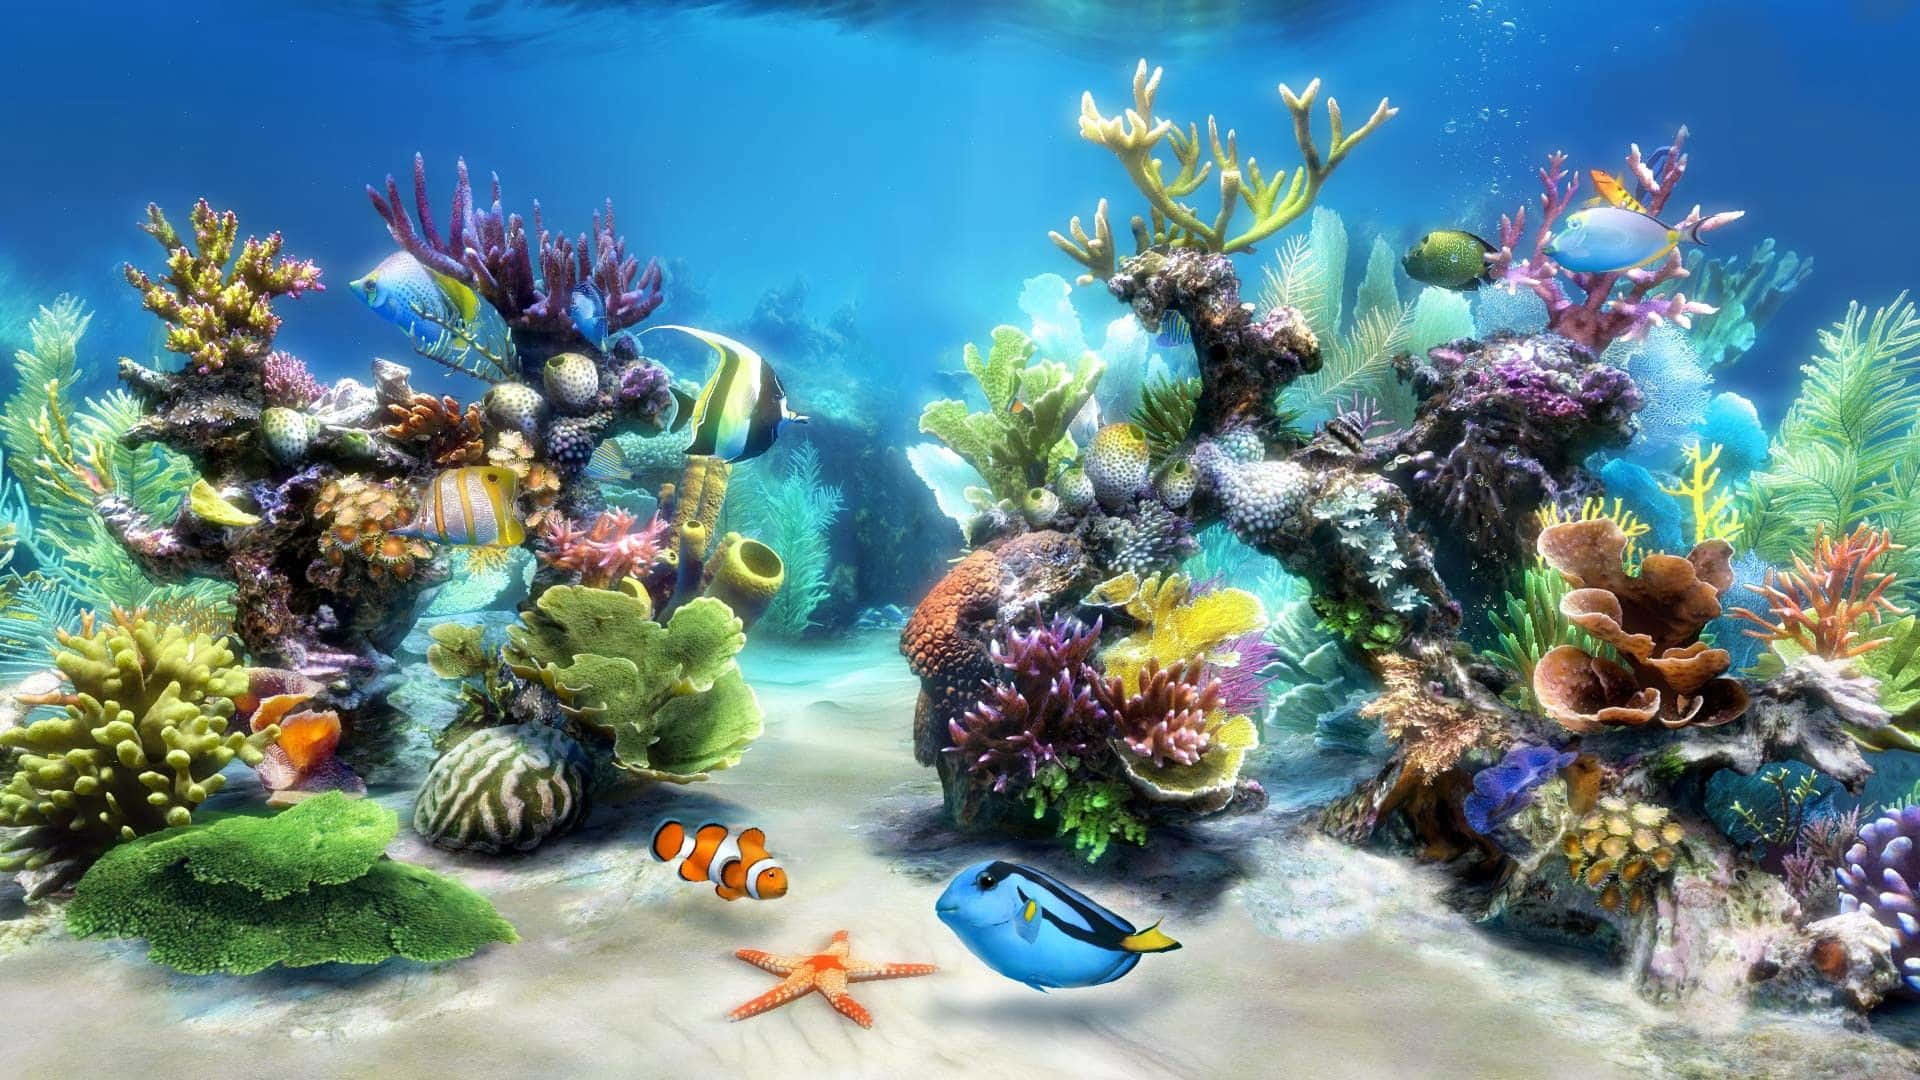 Enjoy the beauty of nature with Live Fish Wallpaper